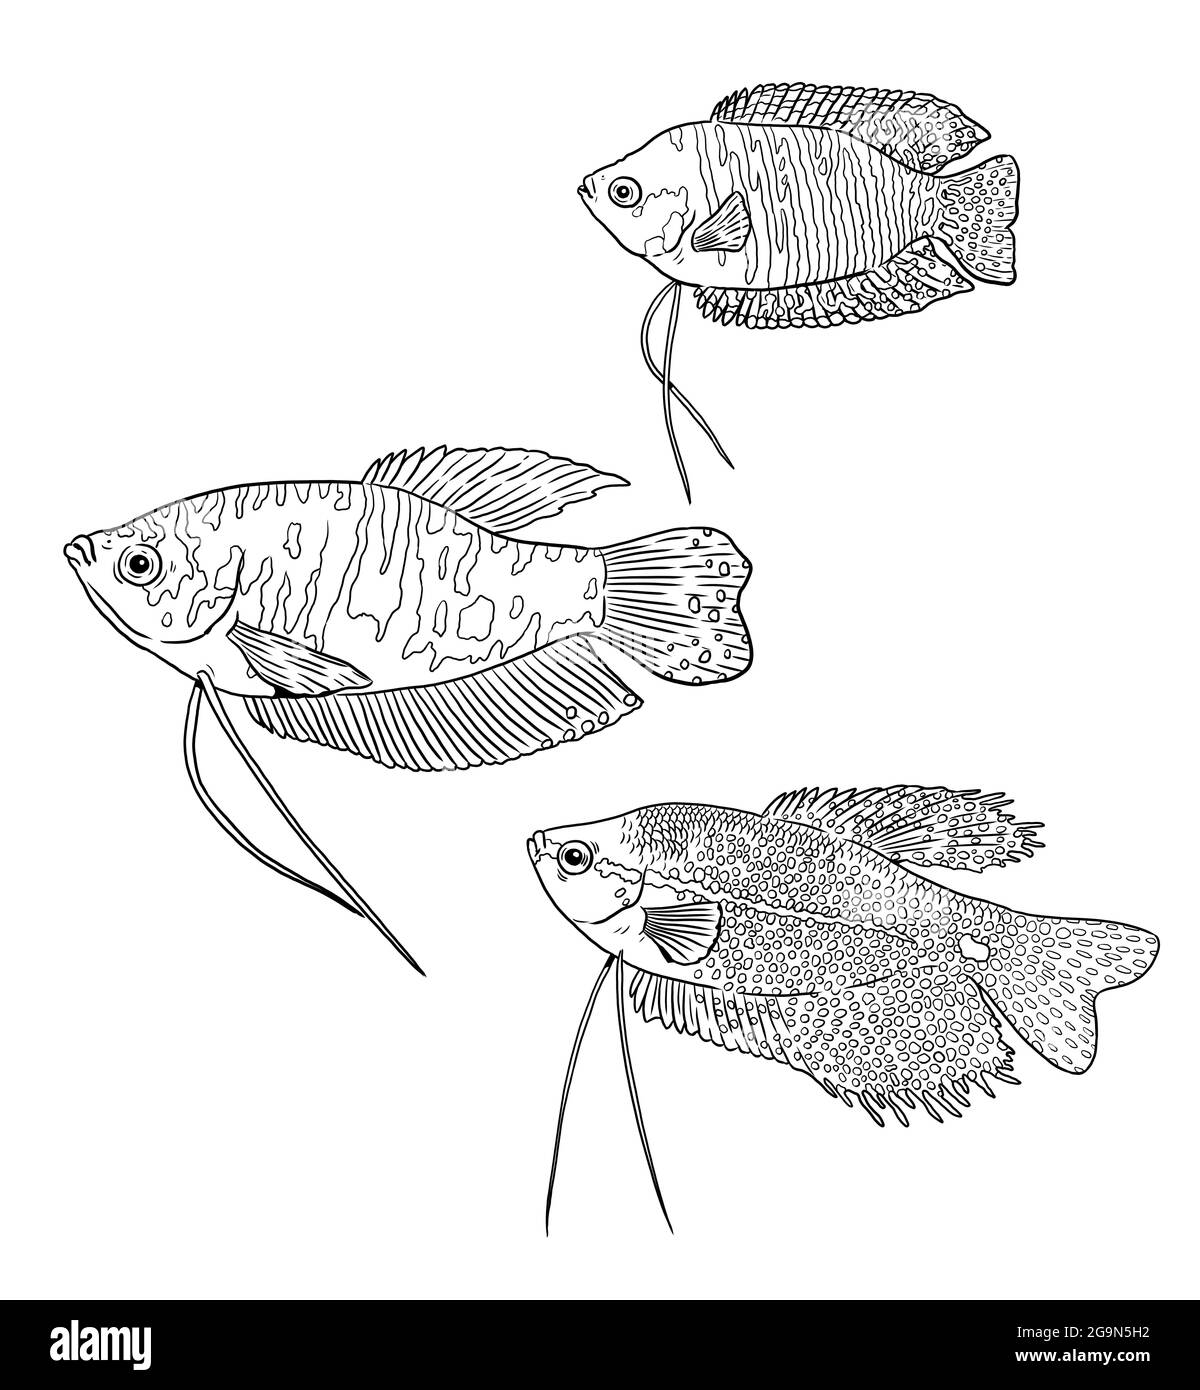 Aquarium with gourami and dwarf gourami. Fishes for coloring. Colorful fish. Drawing for coloring book. Stock Photo